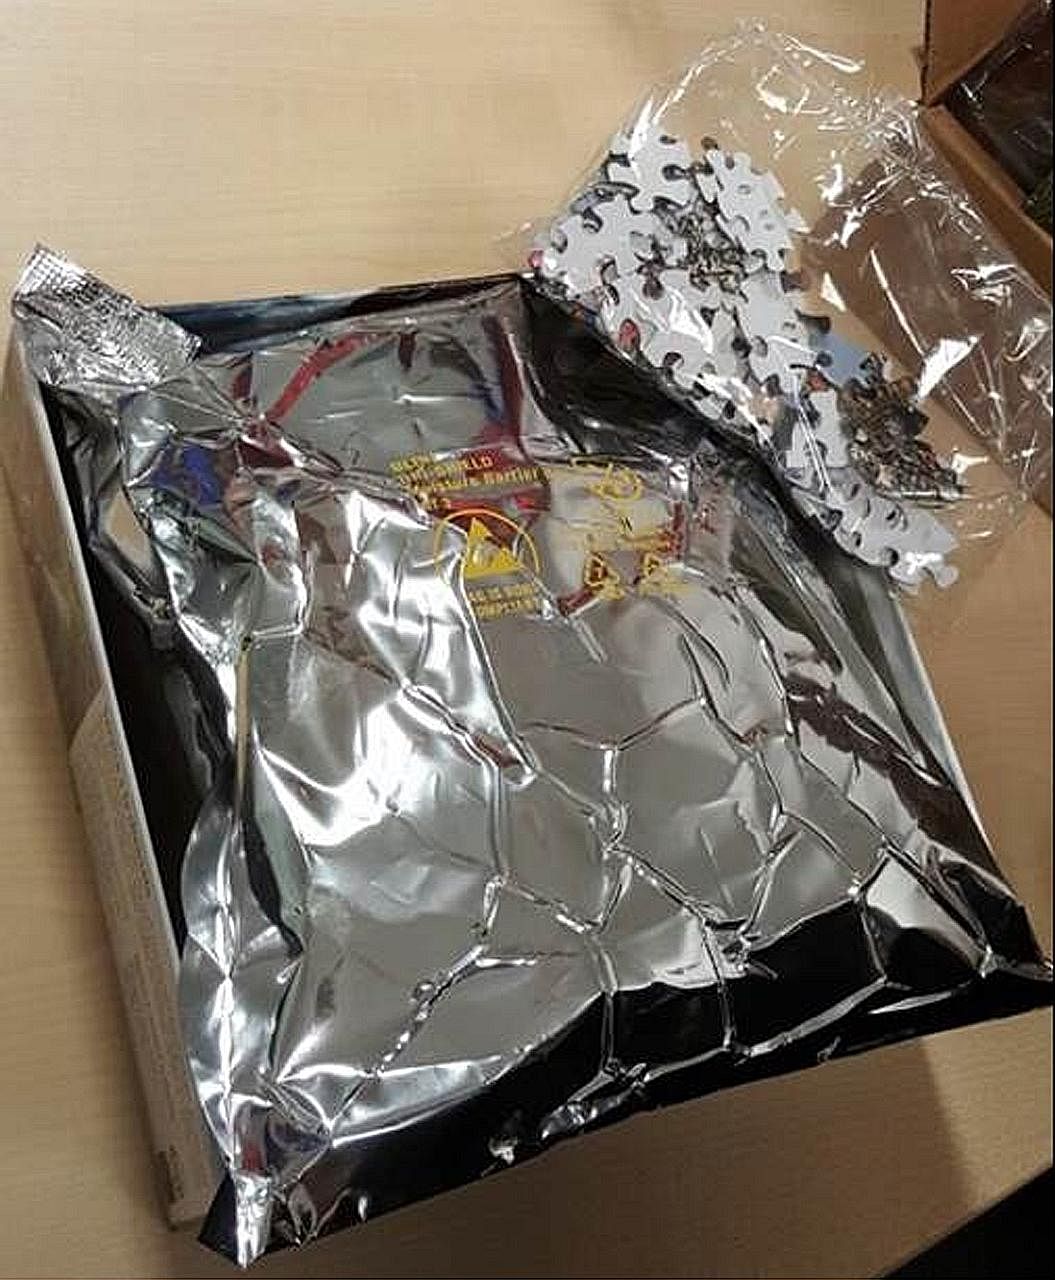 CNB officers were alerted to a parcel suspected of containing about 136g of cannabis on Friday.